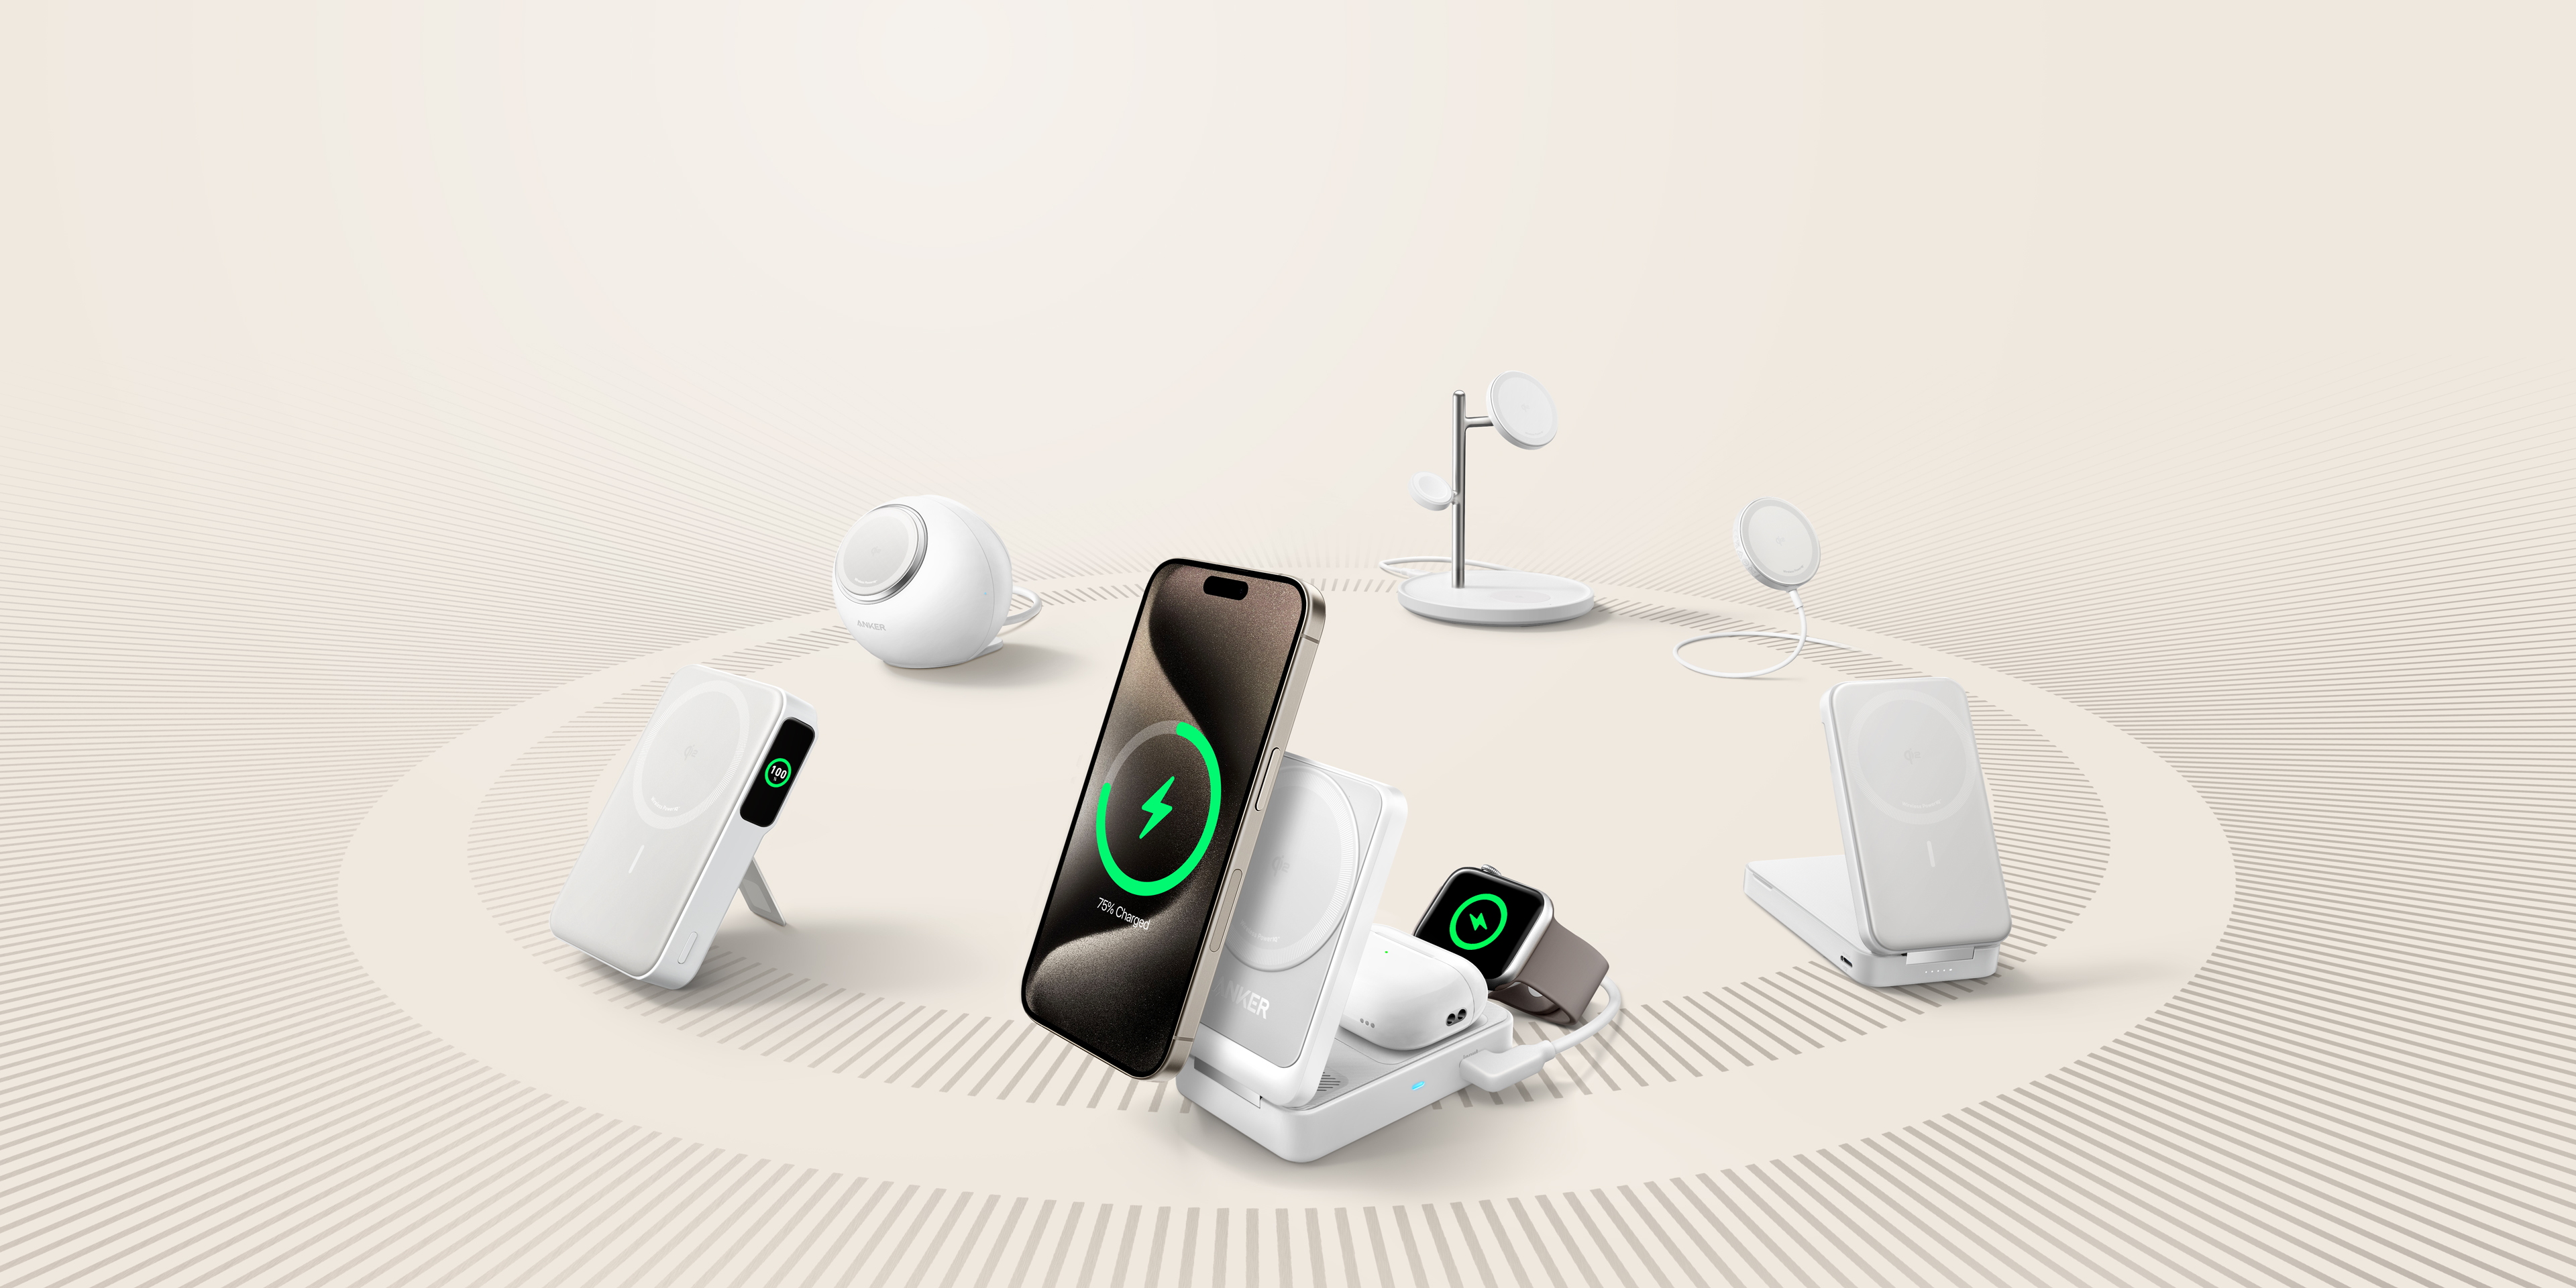 Anker Delivers Qi2 Certified Wireless Charging with Latest MagGo Lineup